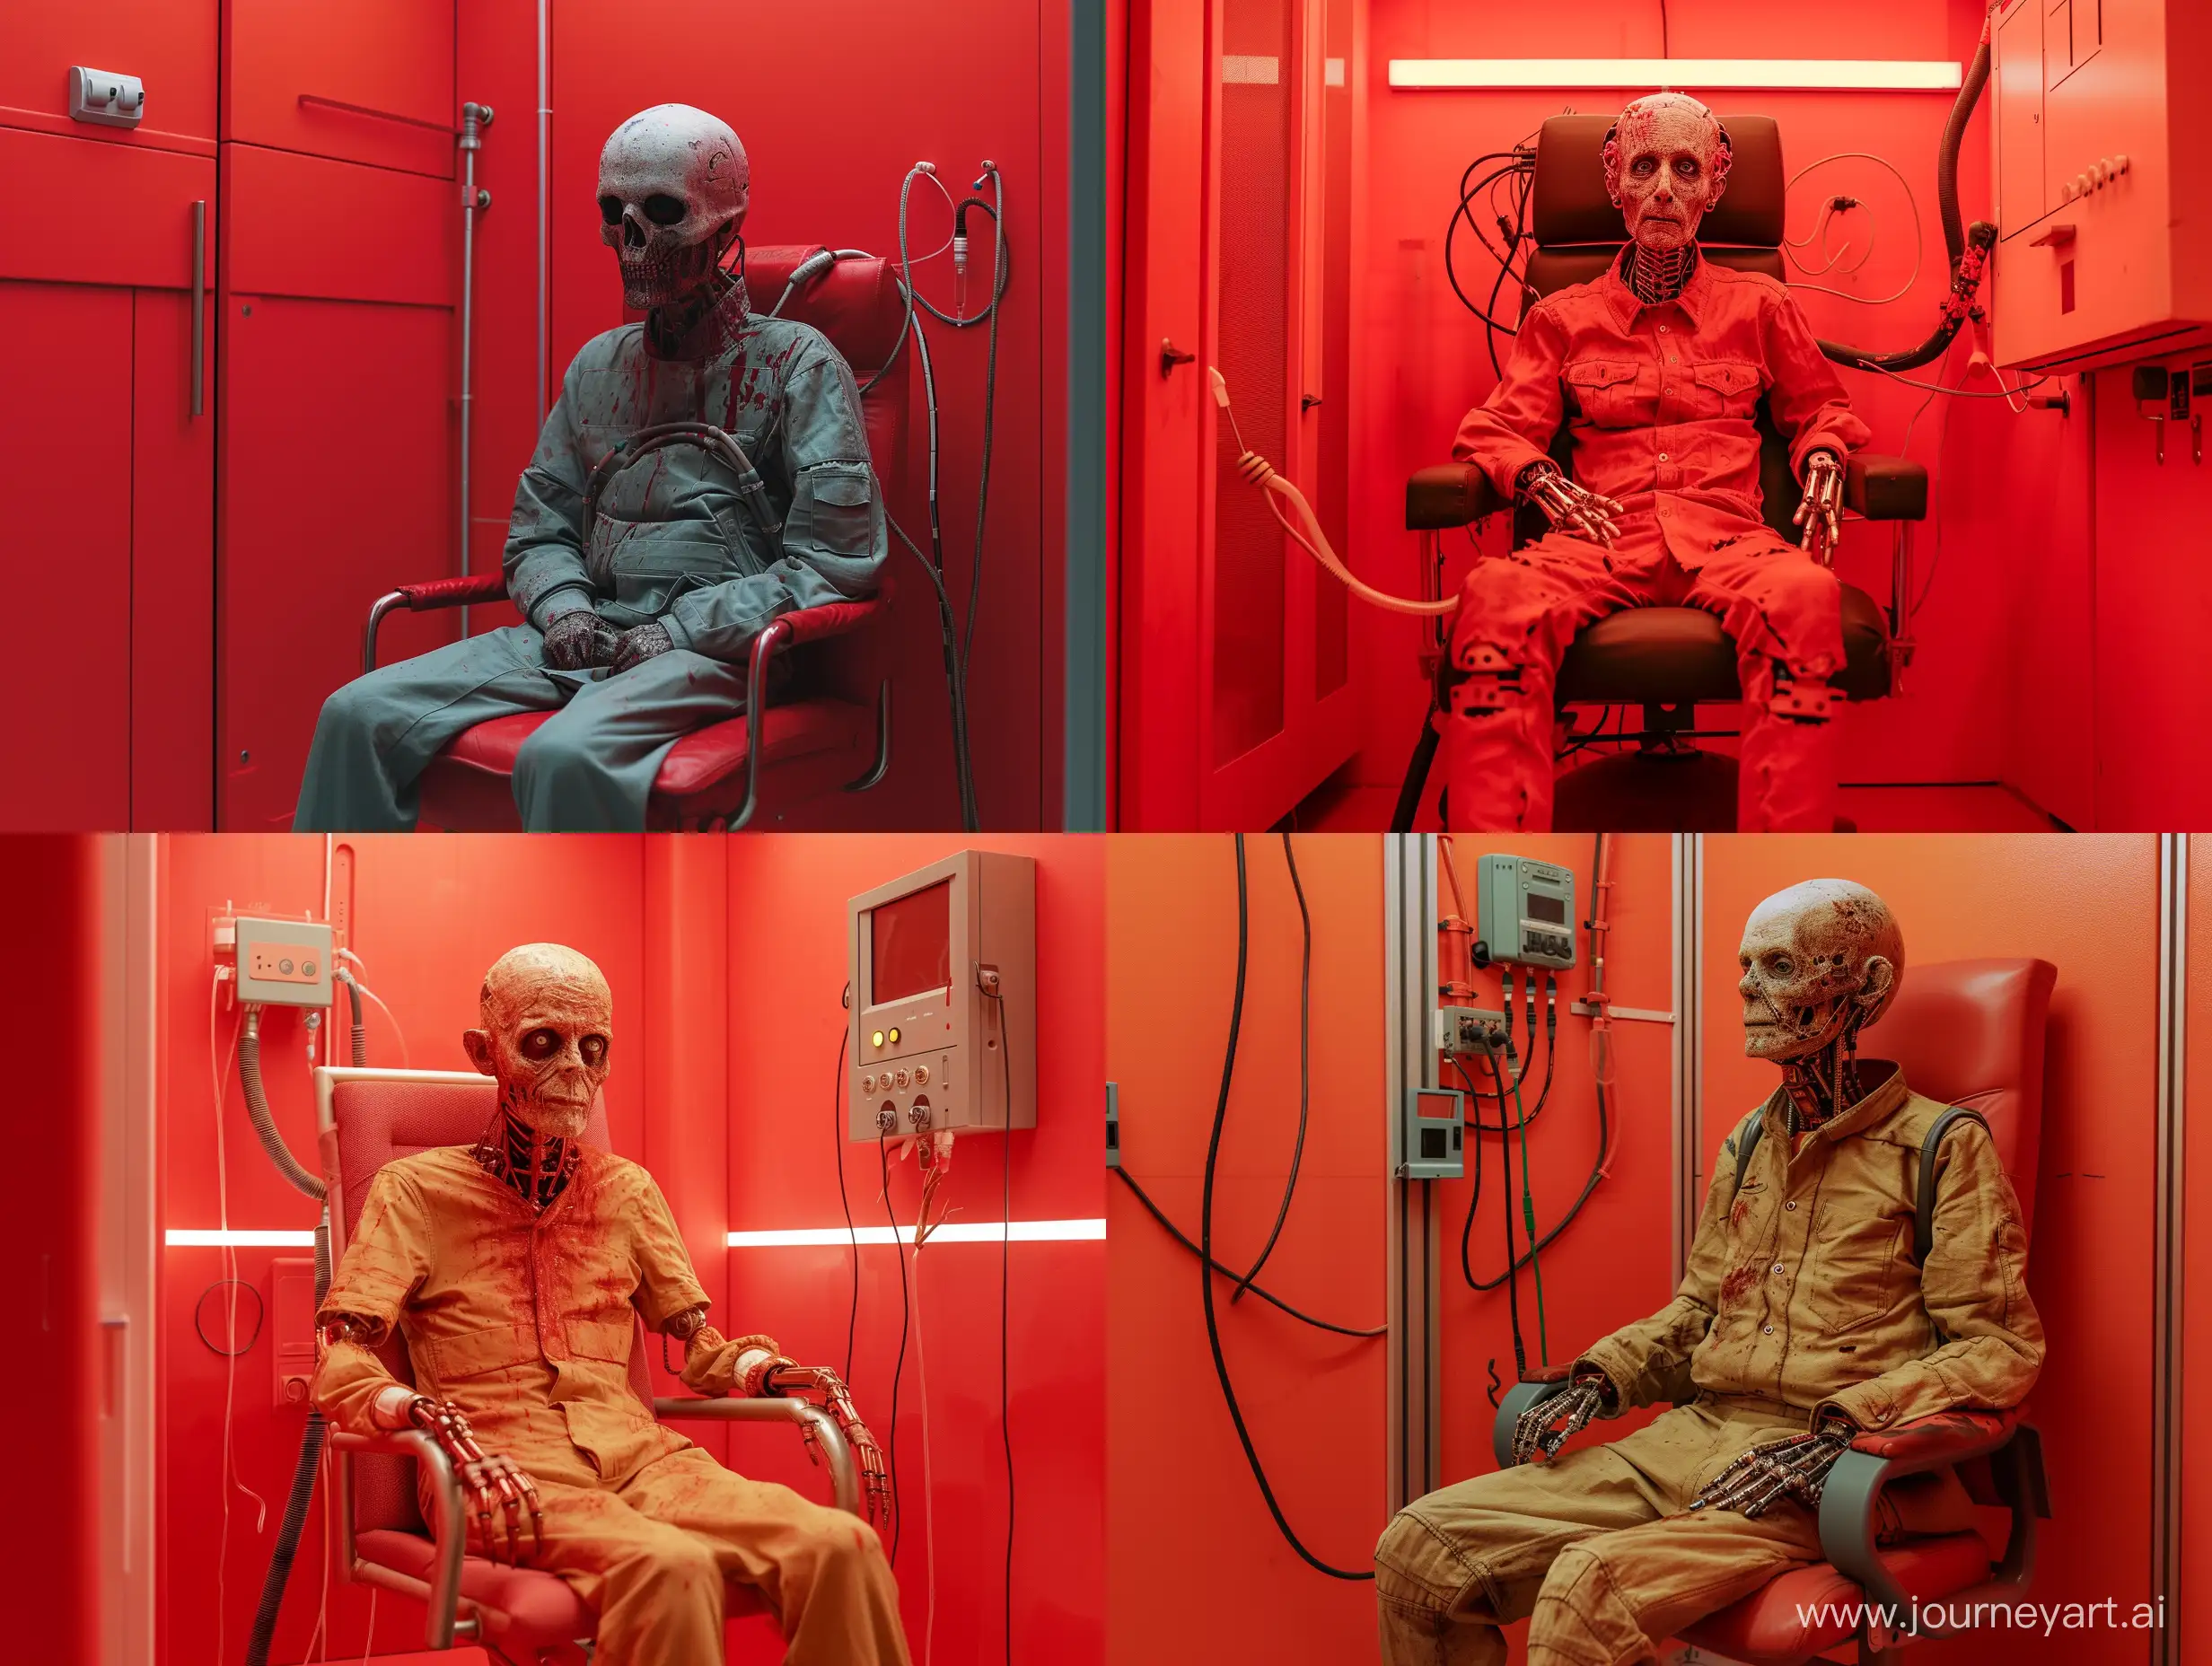 Creepy-Cyborg-in-Red-Room-with-Tubes-Horror-Documentary-Photography